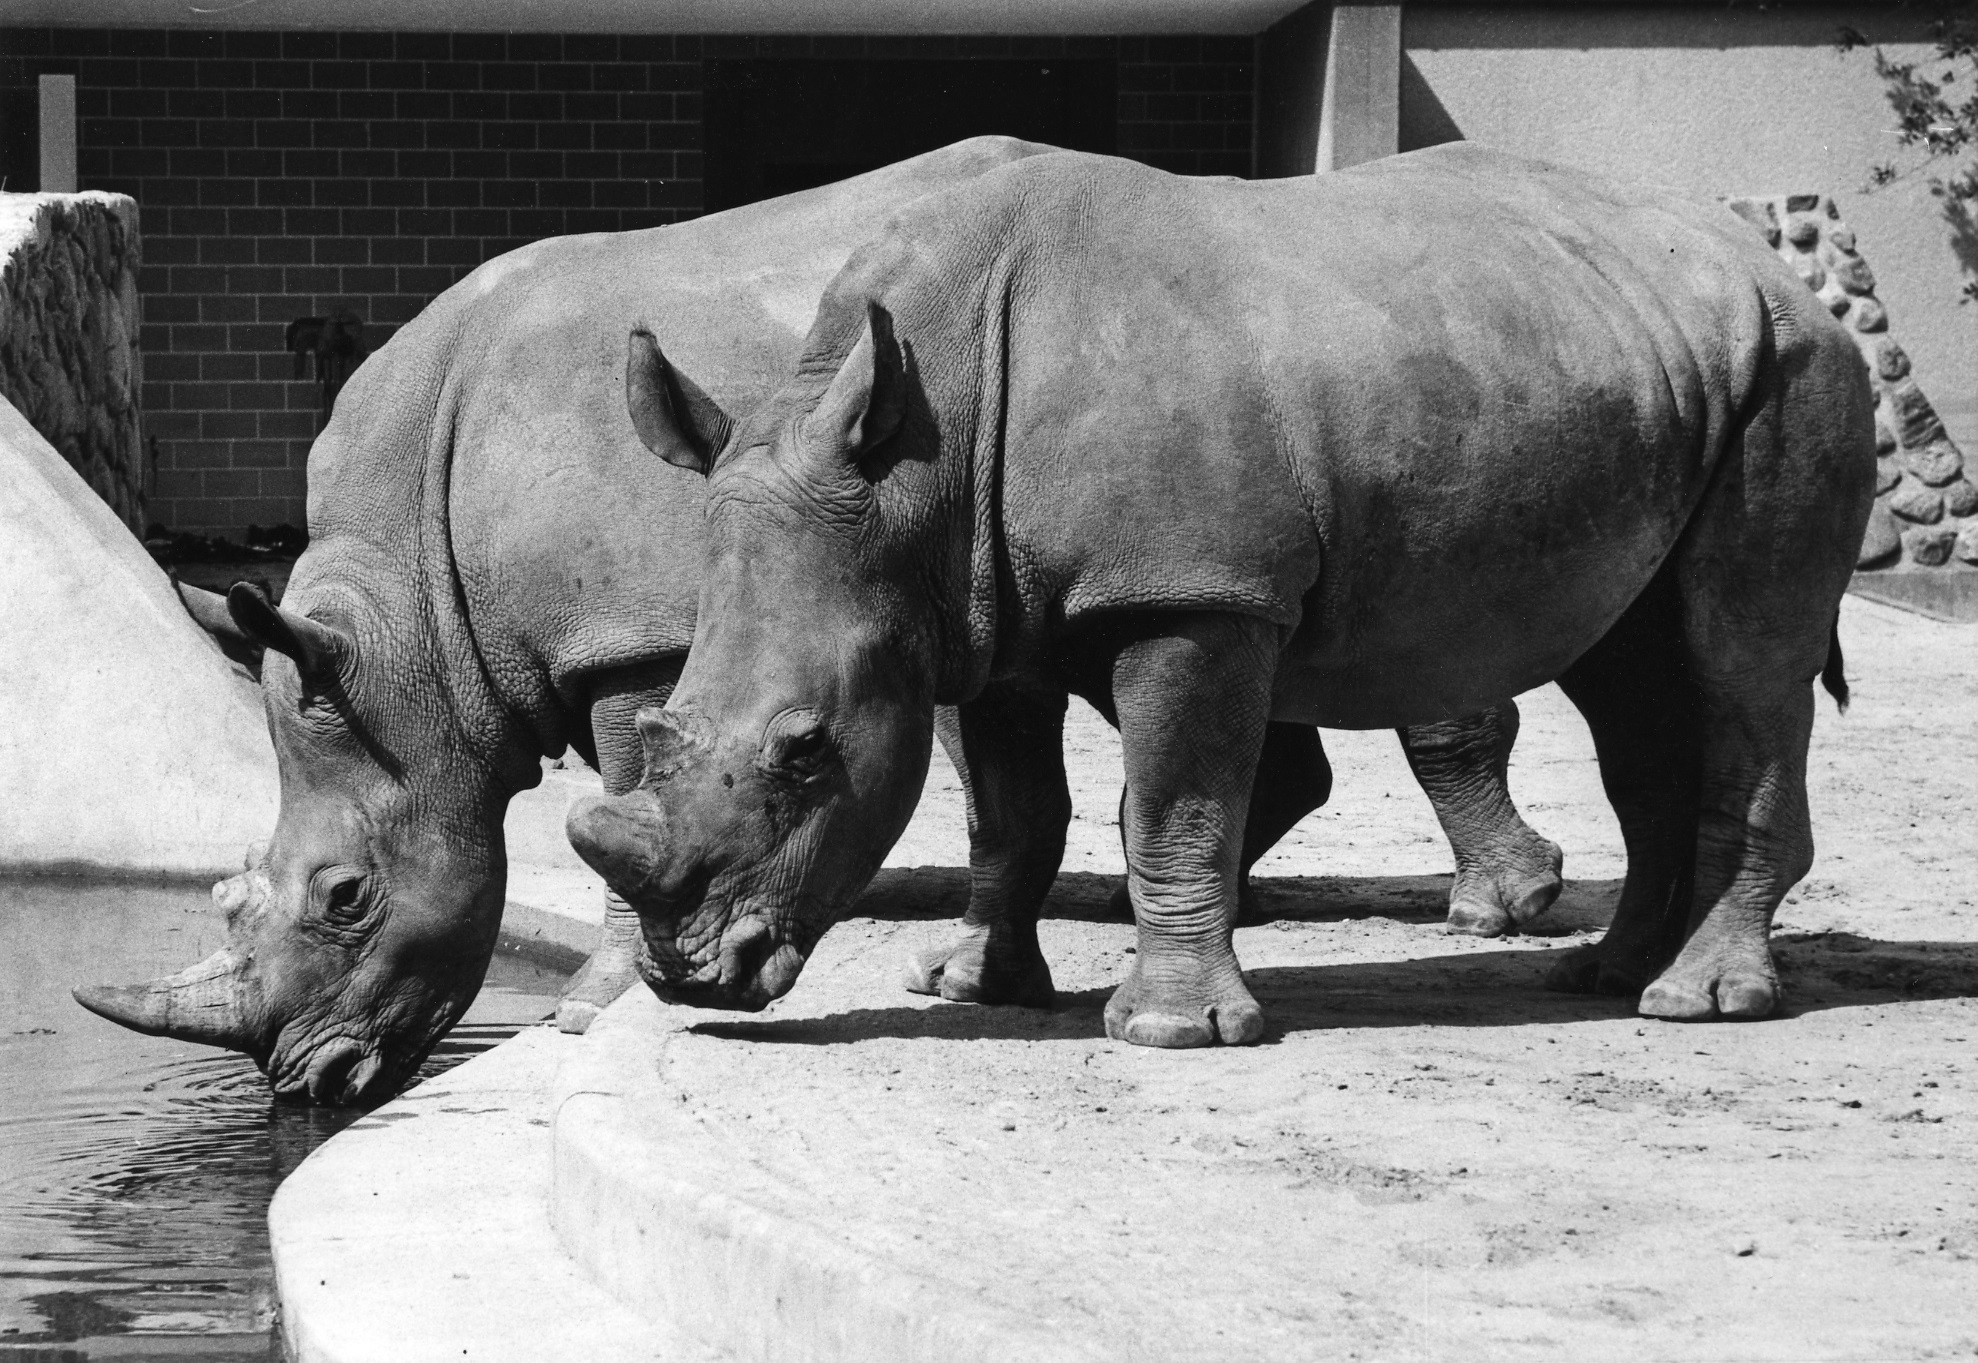 Black and white image: Two white rhinos stand in an enclosure at the water.